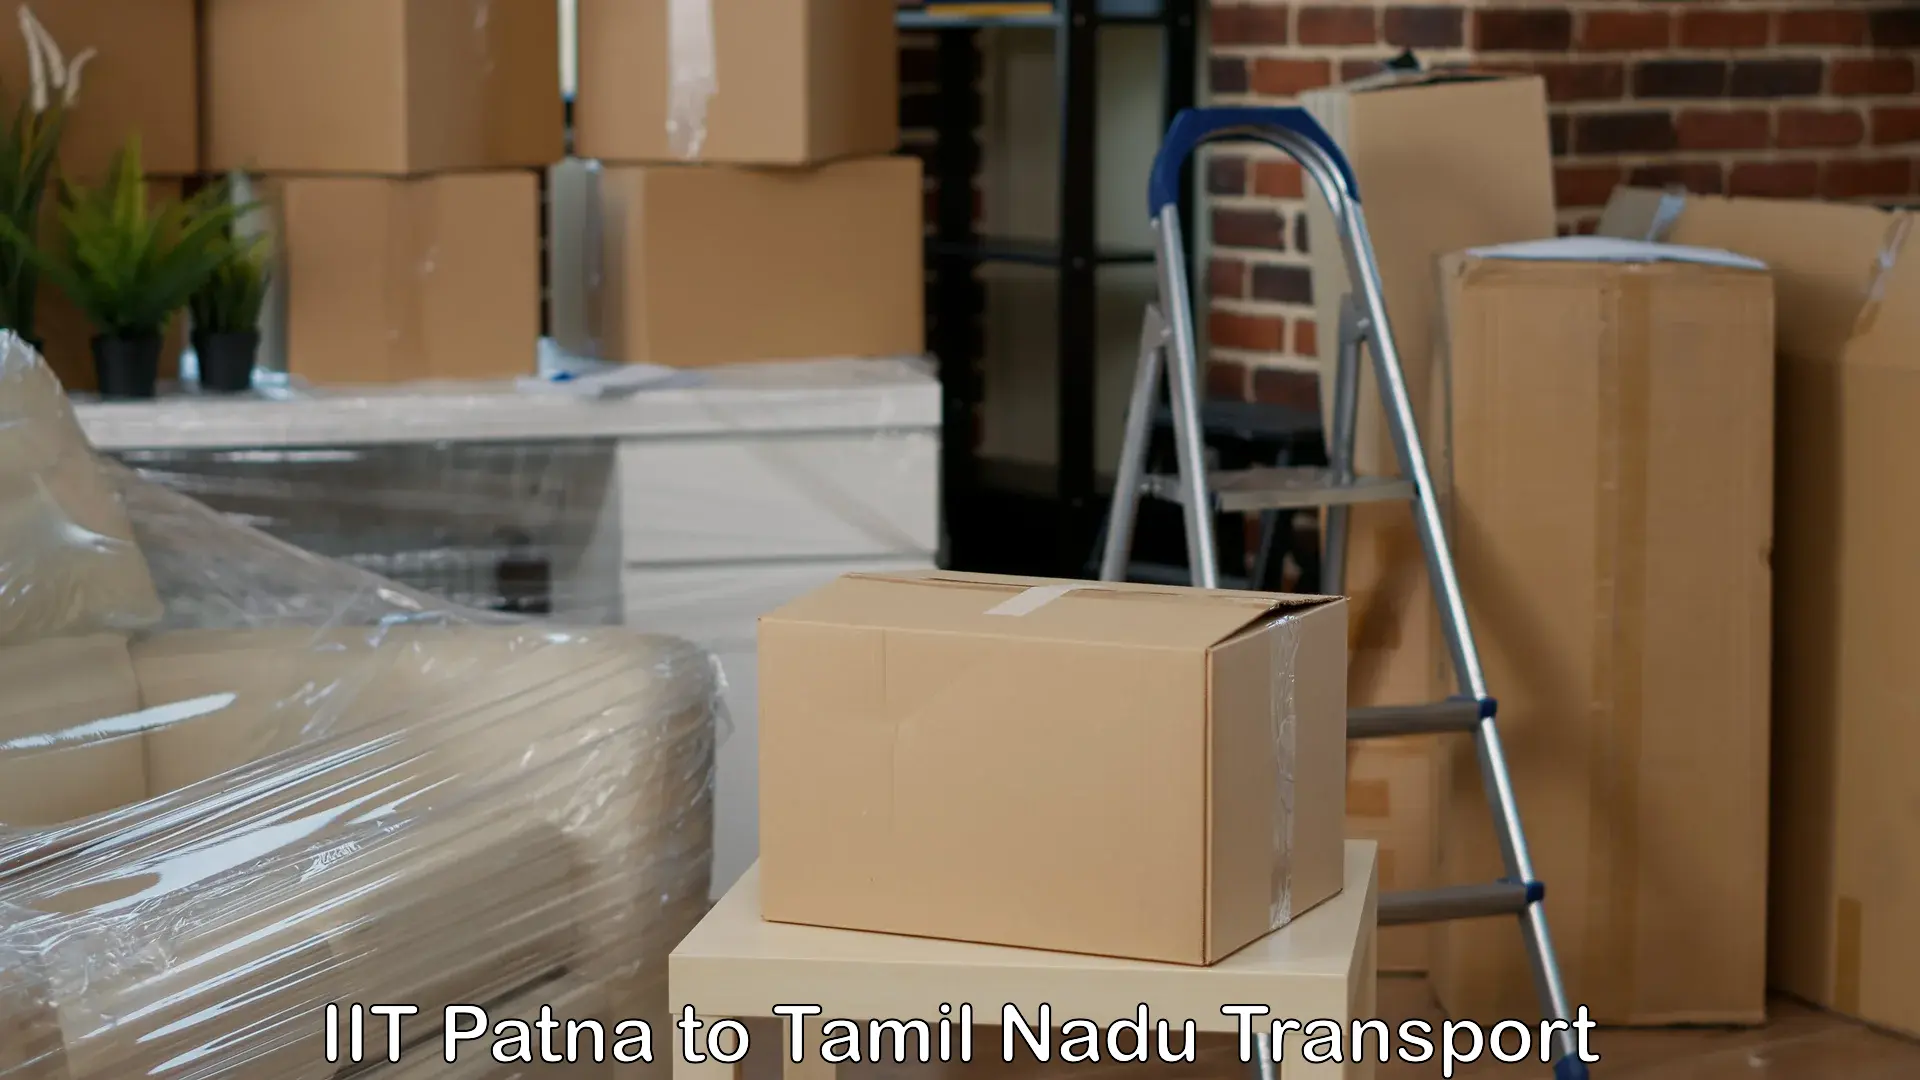 Delivery service IIT Patna to Chennai Port